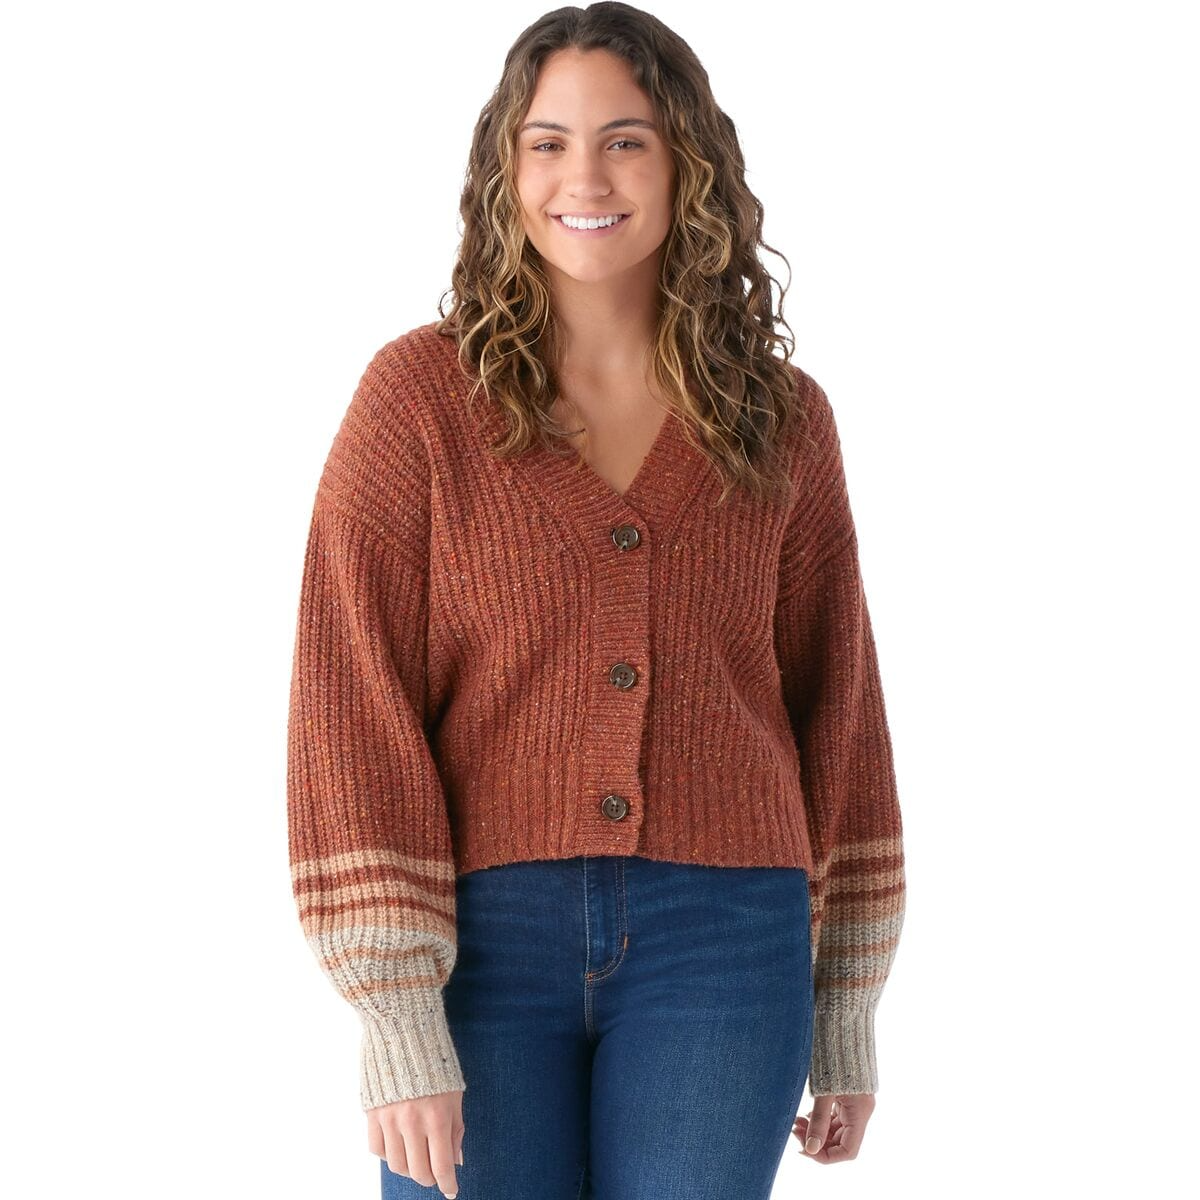 A smiling woman wearing a rust-toned knitted cardigan with striped cuffs and blue jeans.